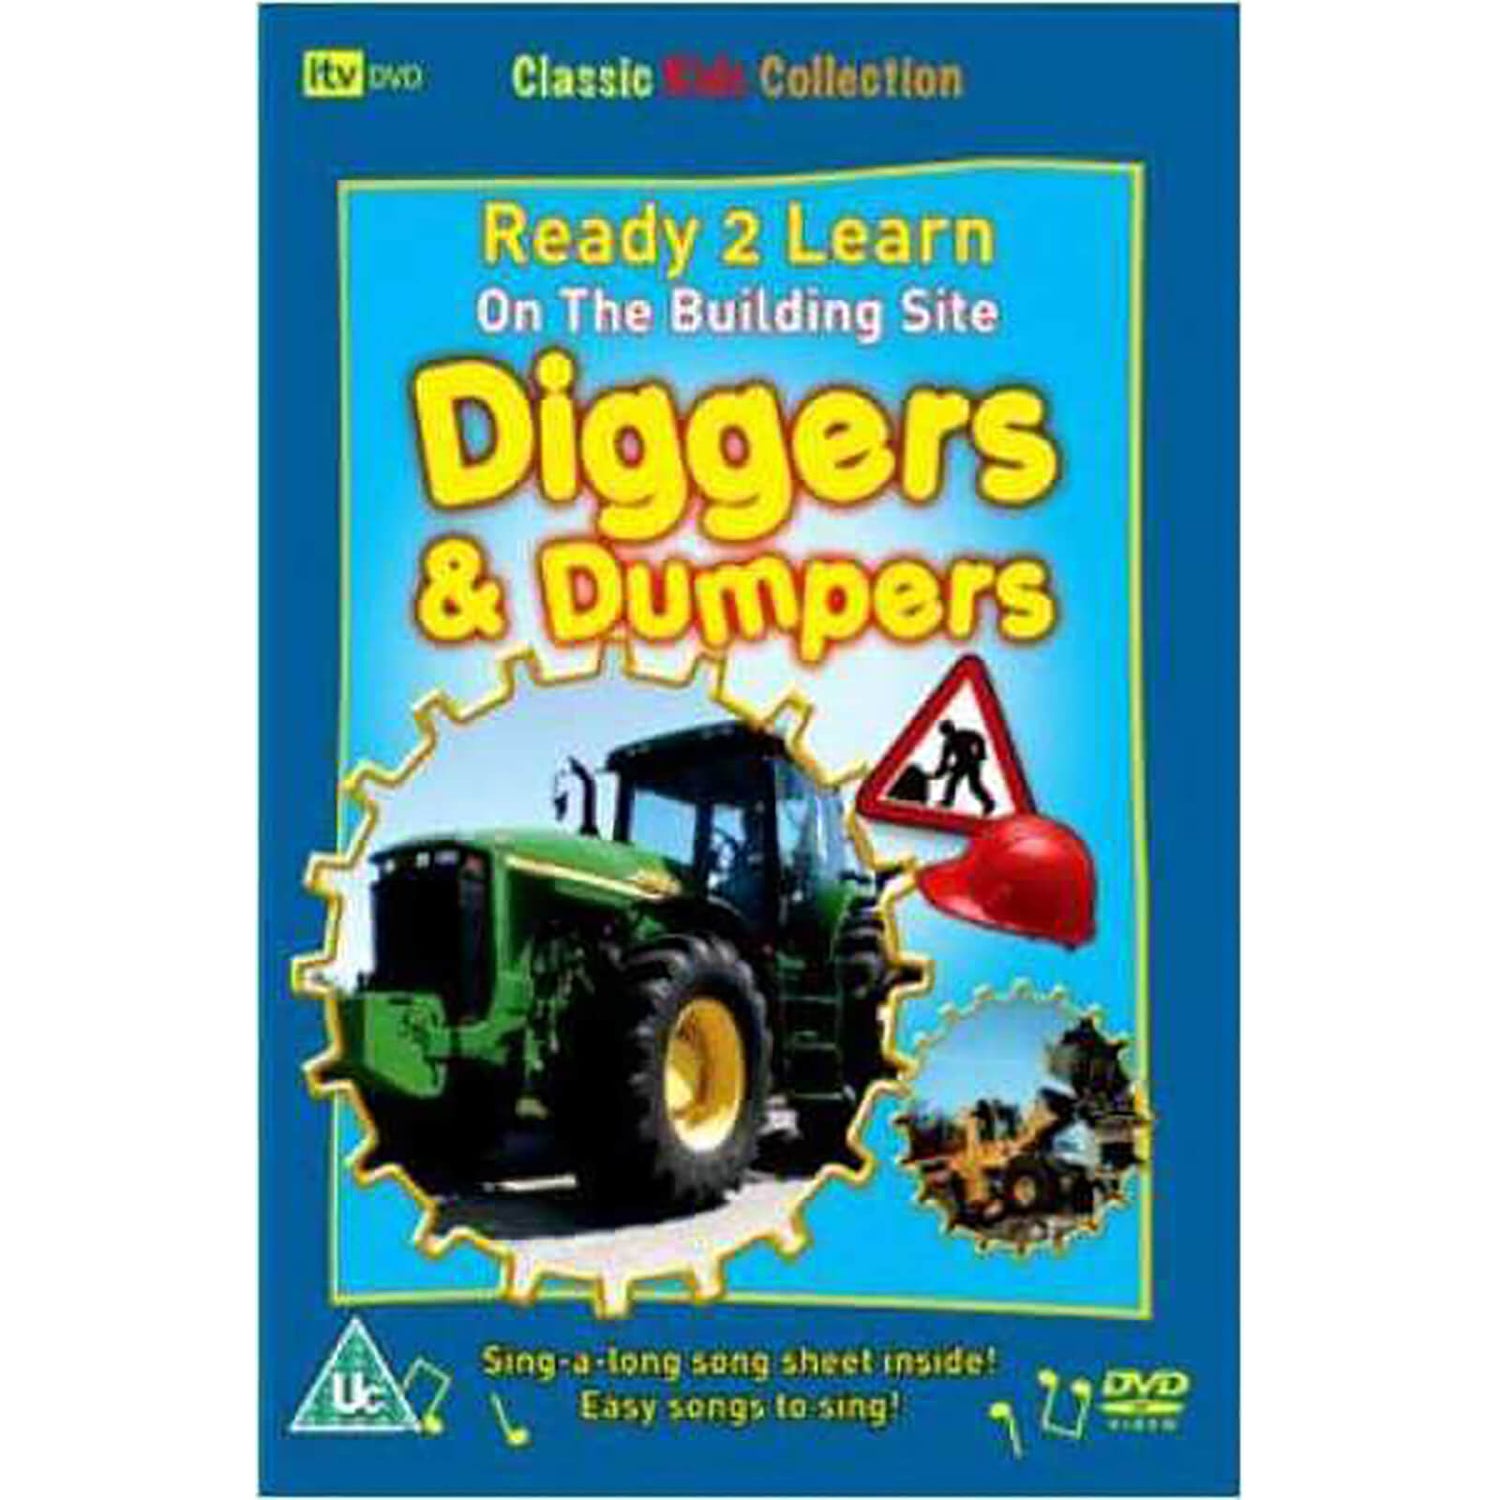 Ready 2 Learn - Diggers